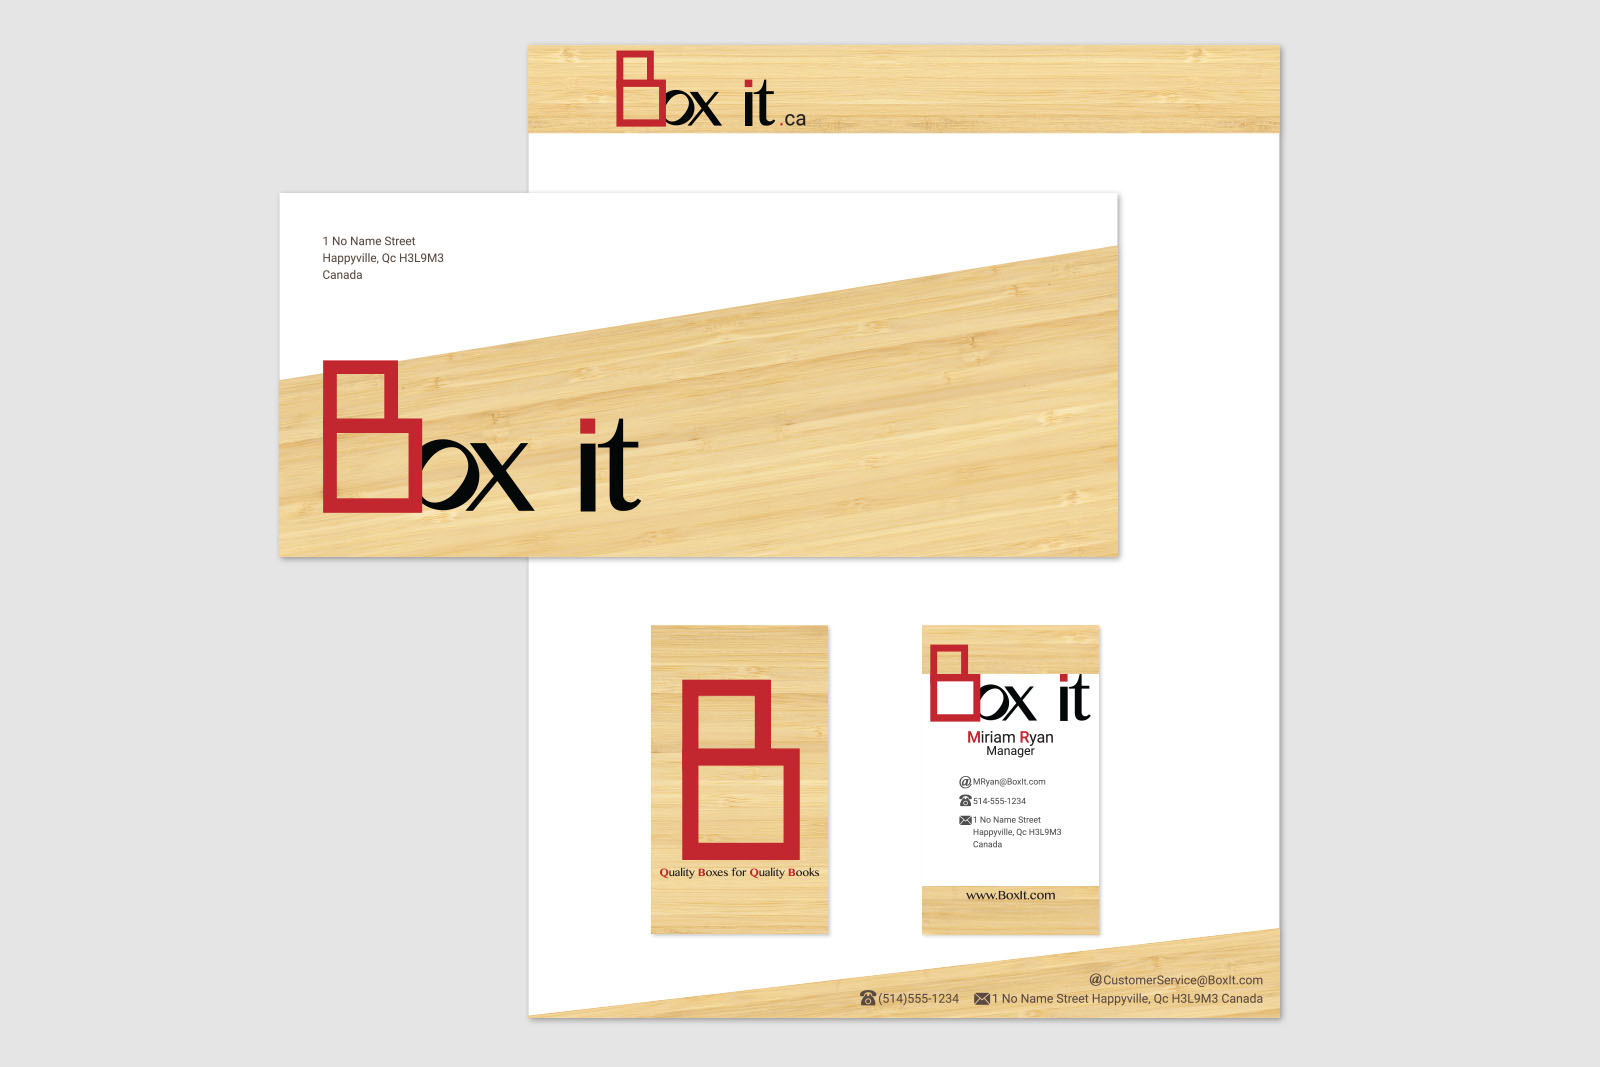 Box it business card, letterhead and envelope